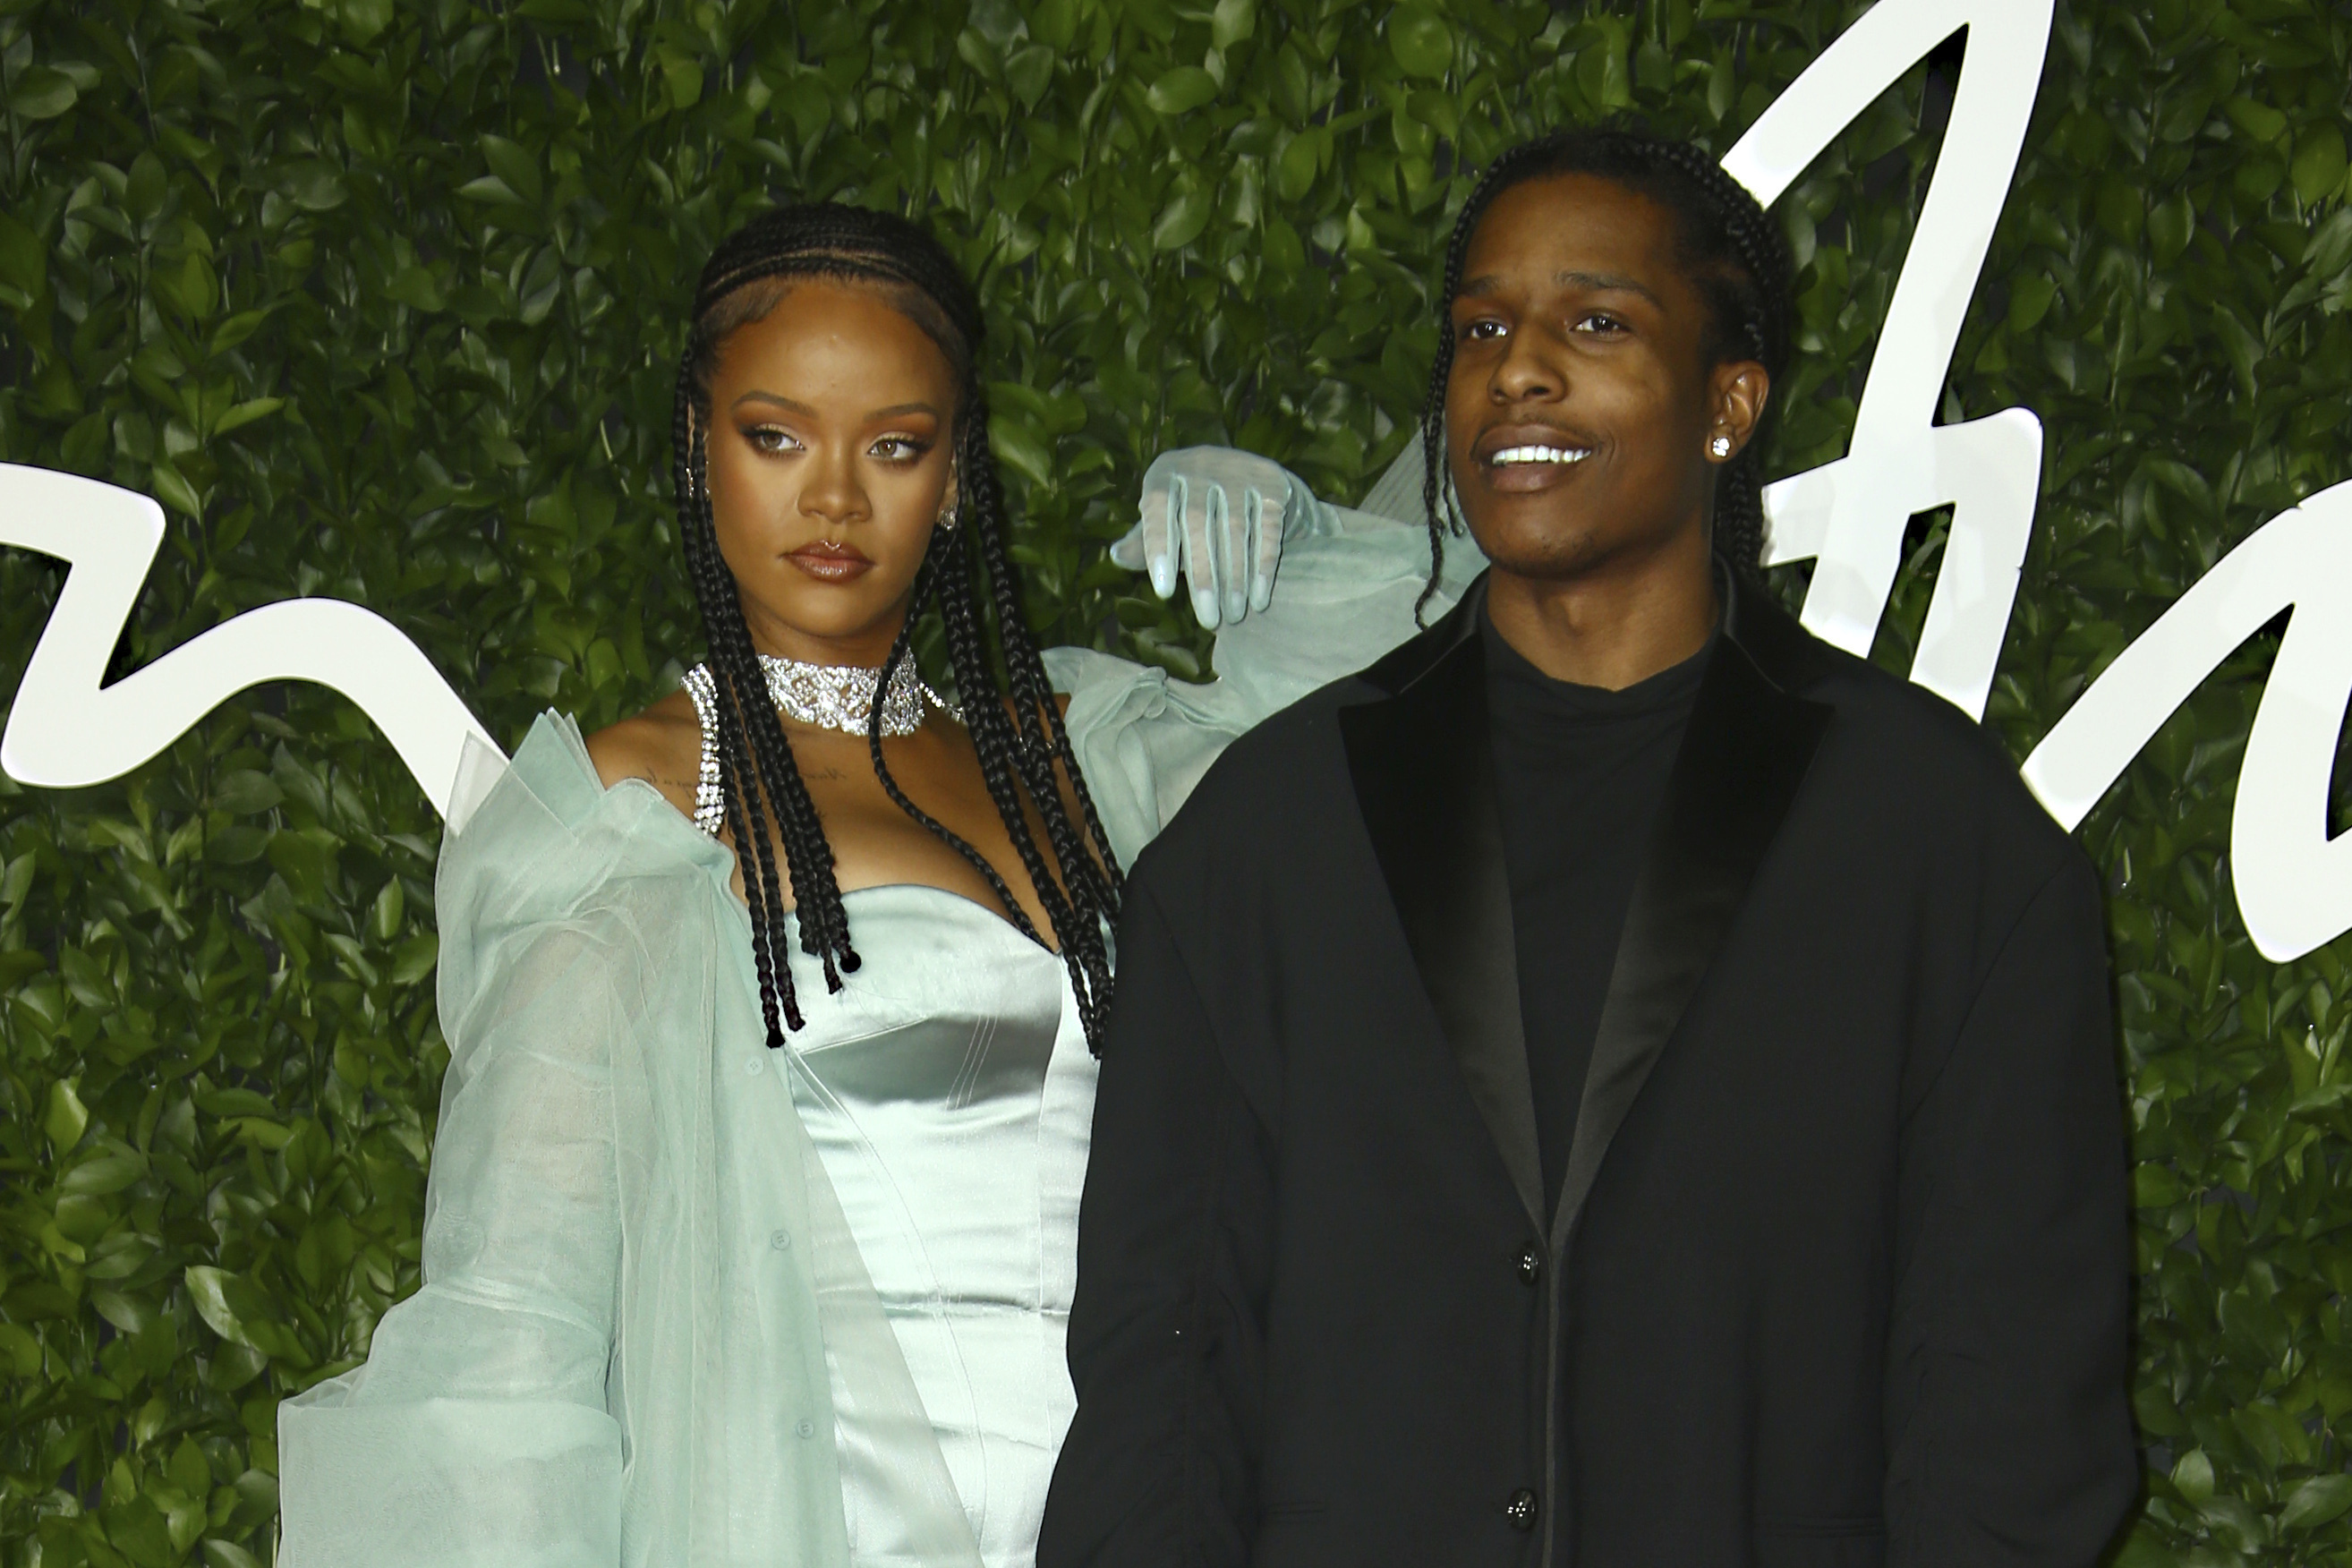 Rihanna and A$AP Rocky considering a move to Barbados to raise son: report  